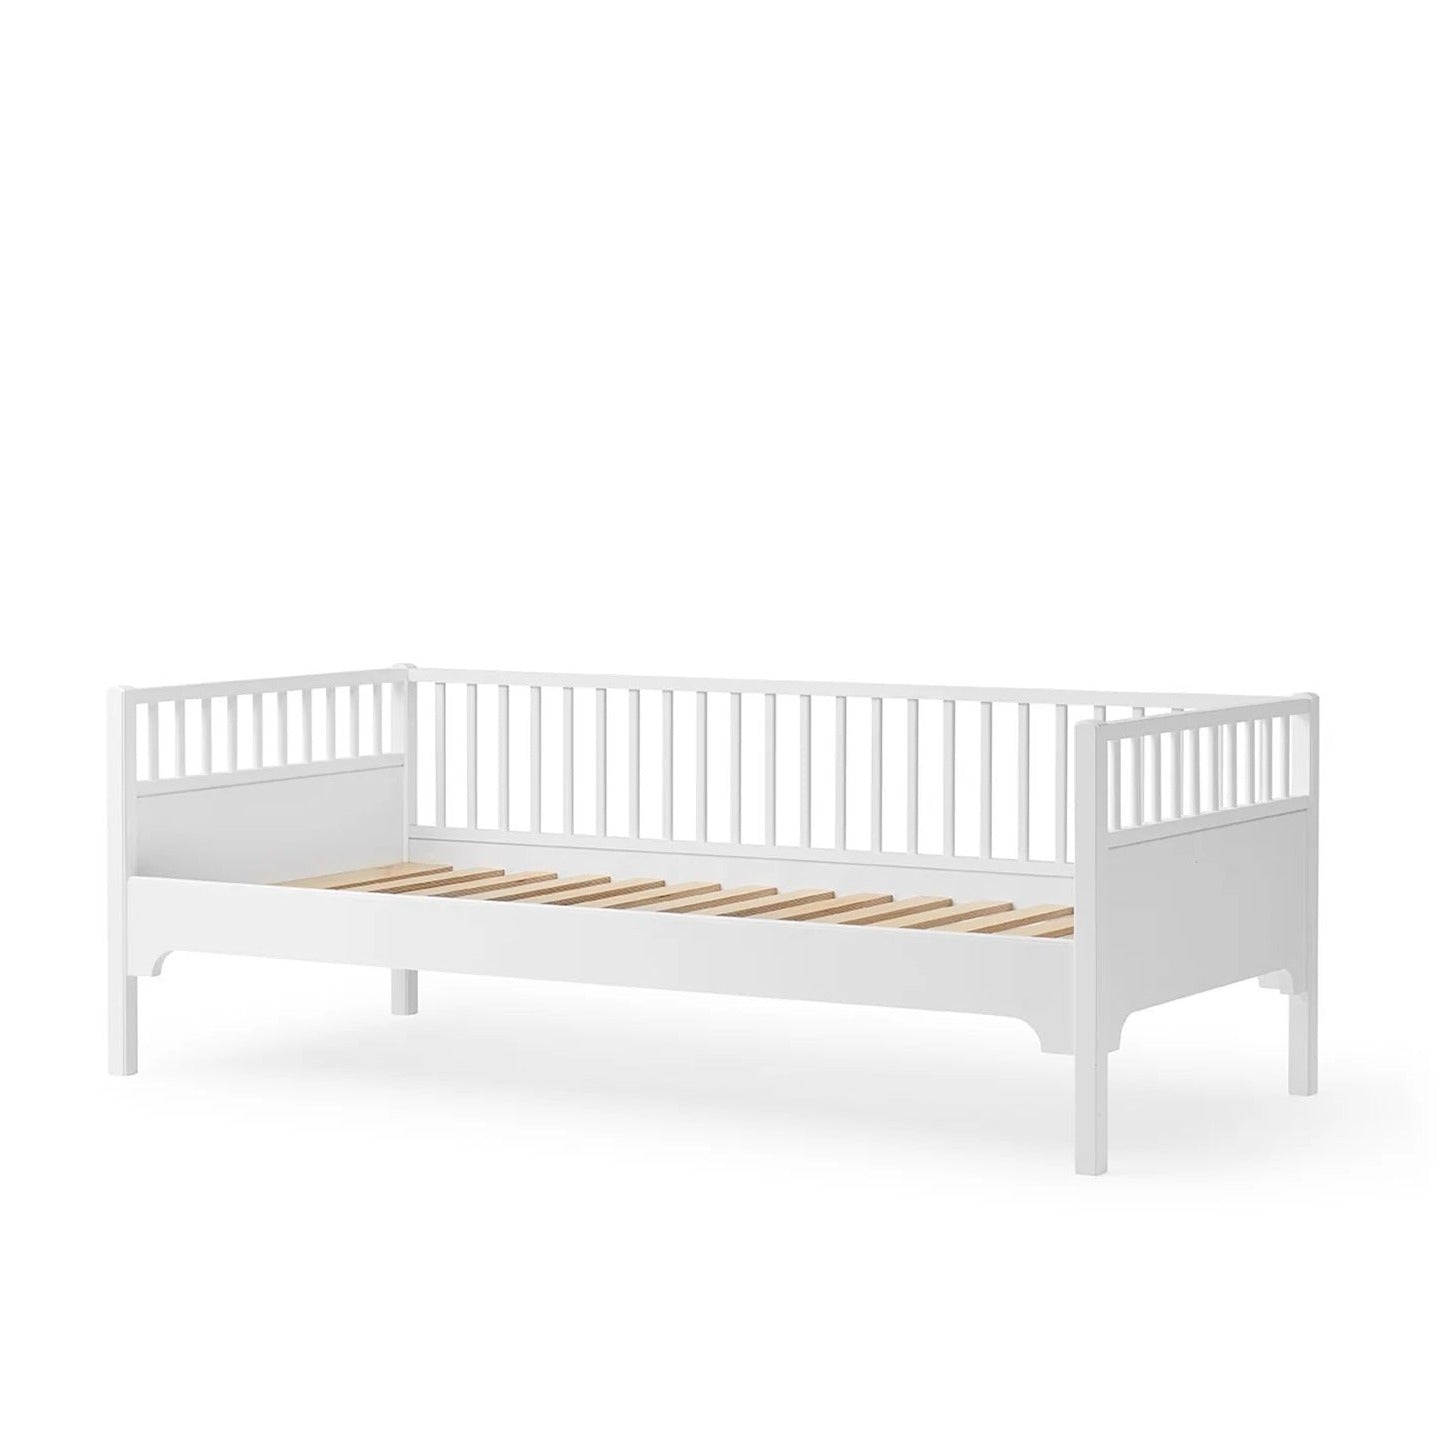 Oliver Furniture Seaside Classic Day Bed